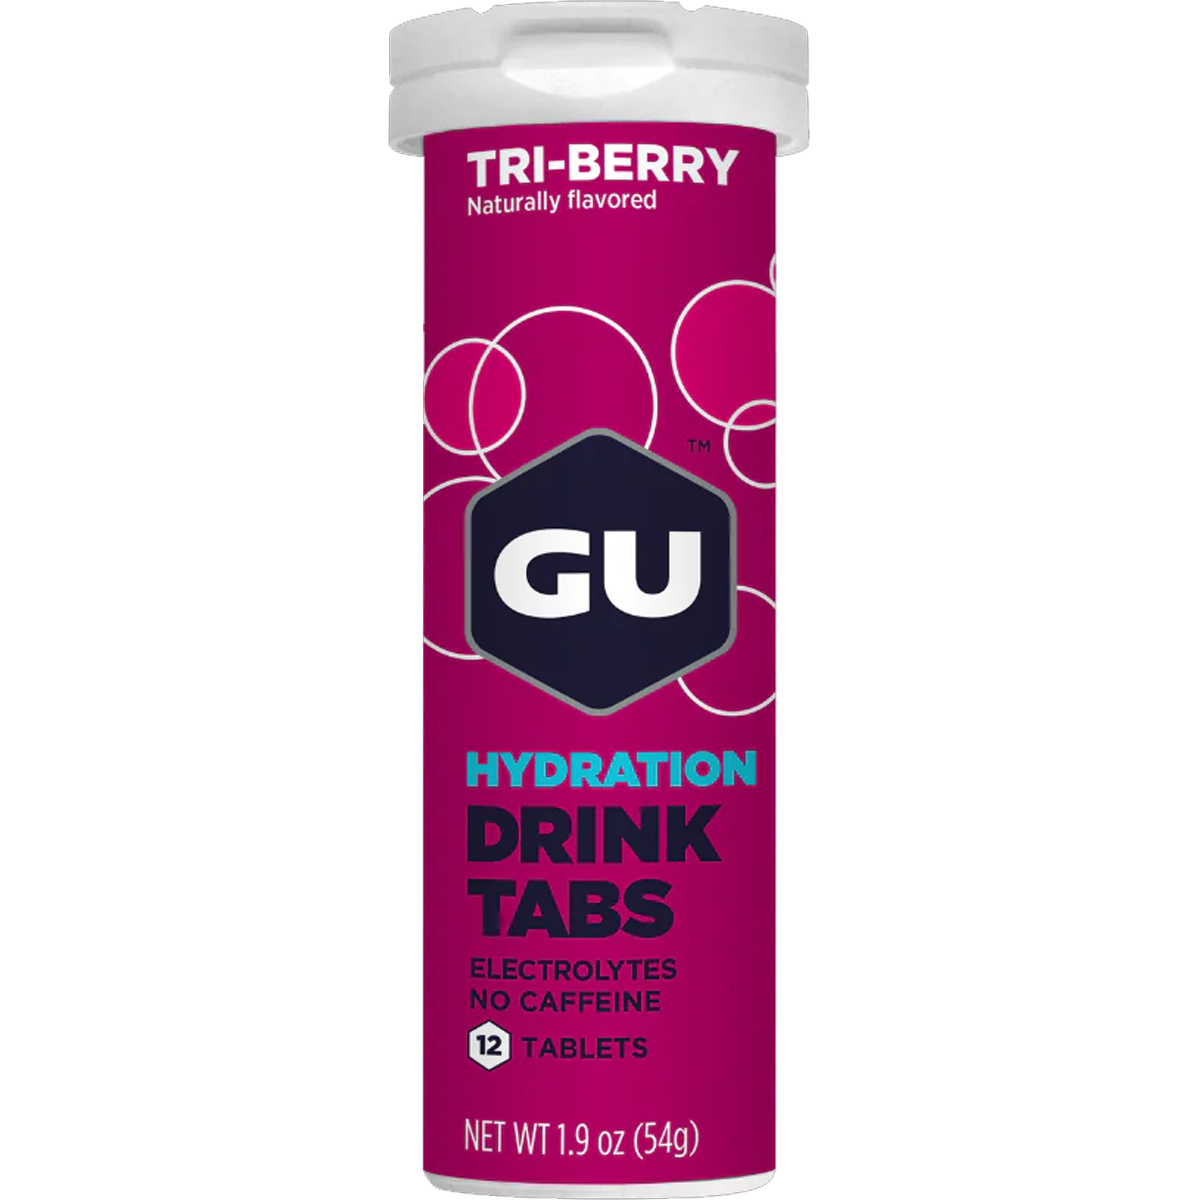 Hydration Drink Tabs alternate view